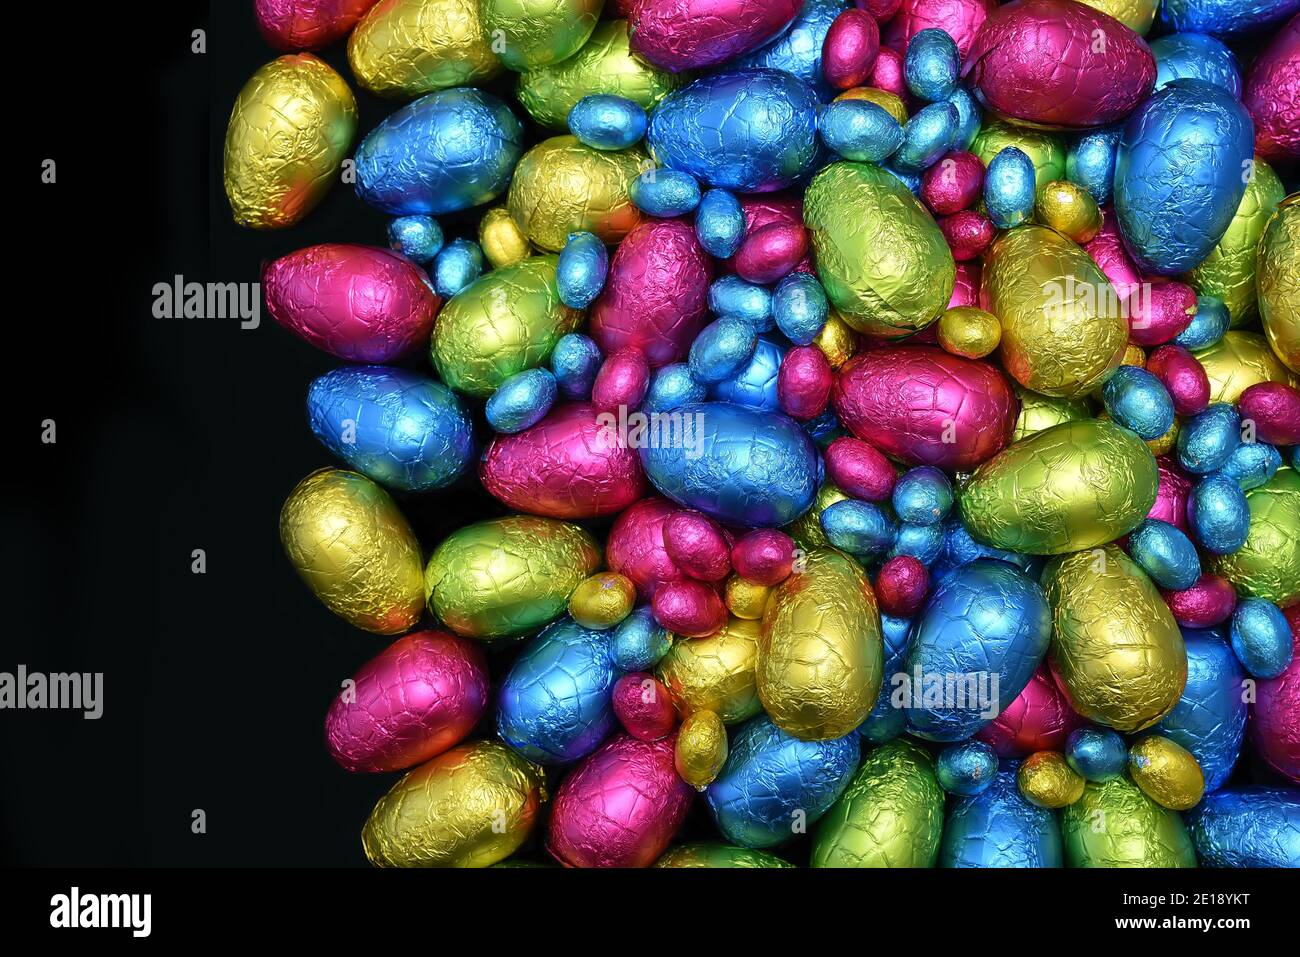 Pile or group of multi coloured & different sizes of colourful foil wrapped chocolate easter eggs in pink, blue, yellow and lime green against black. Stock Photo